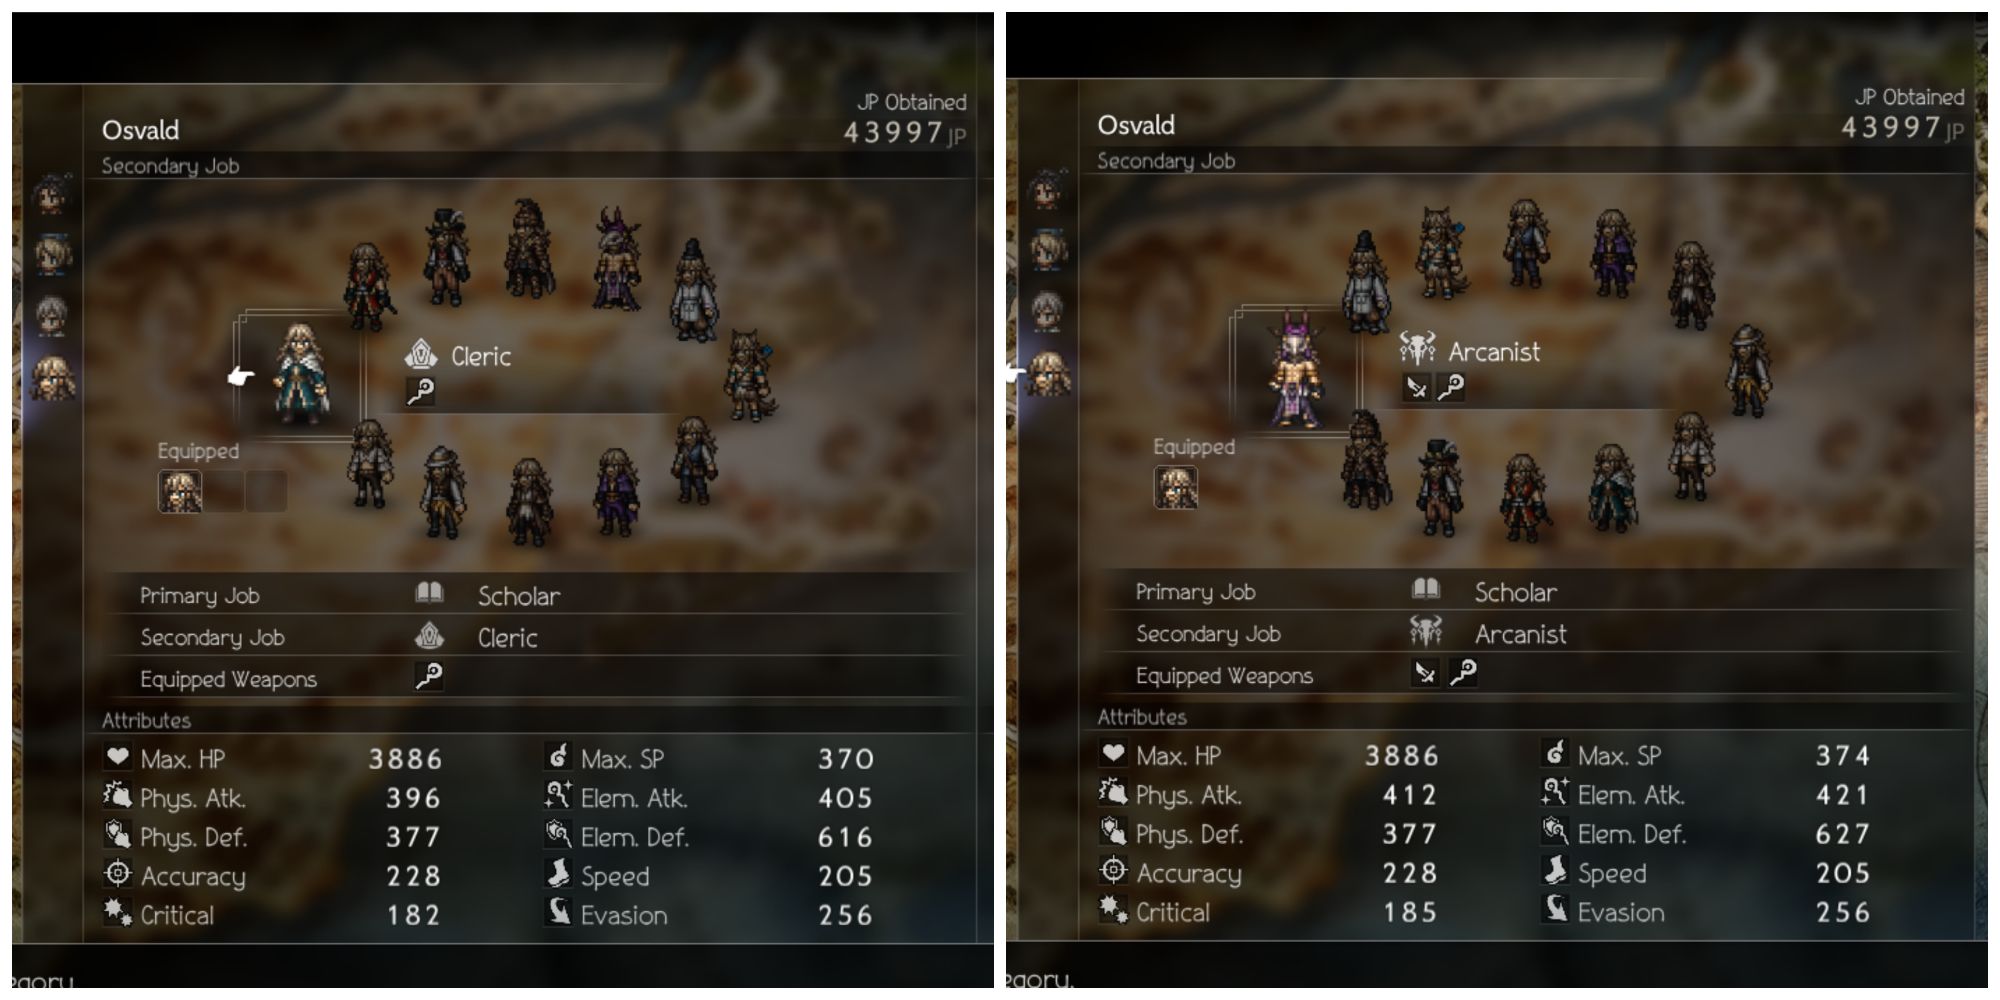 Oswald'S Side Job Choices In Octopath Traveler 2 Are Cleric And Arcanist